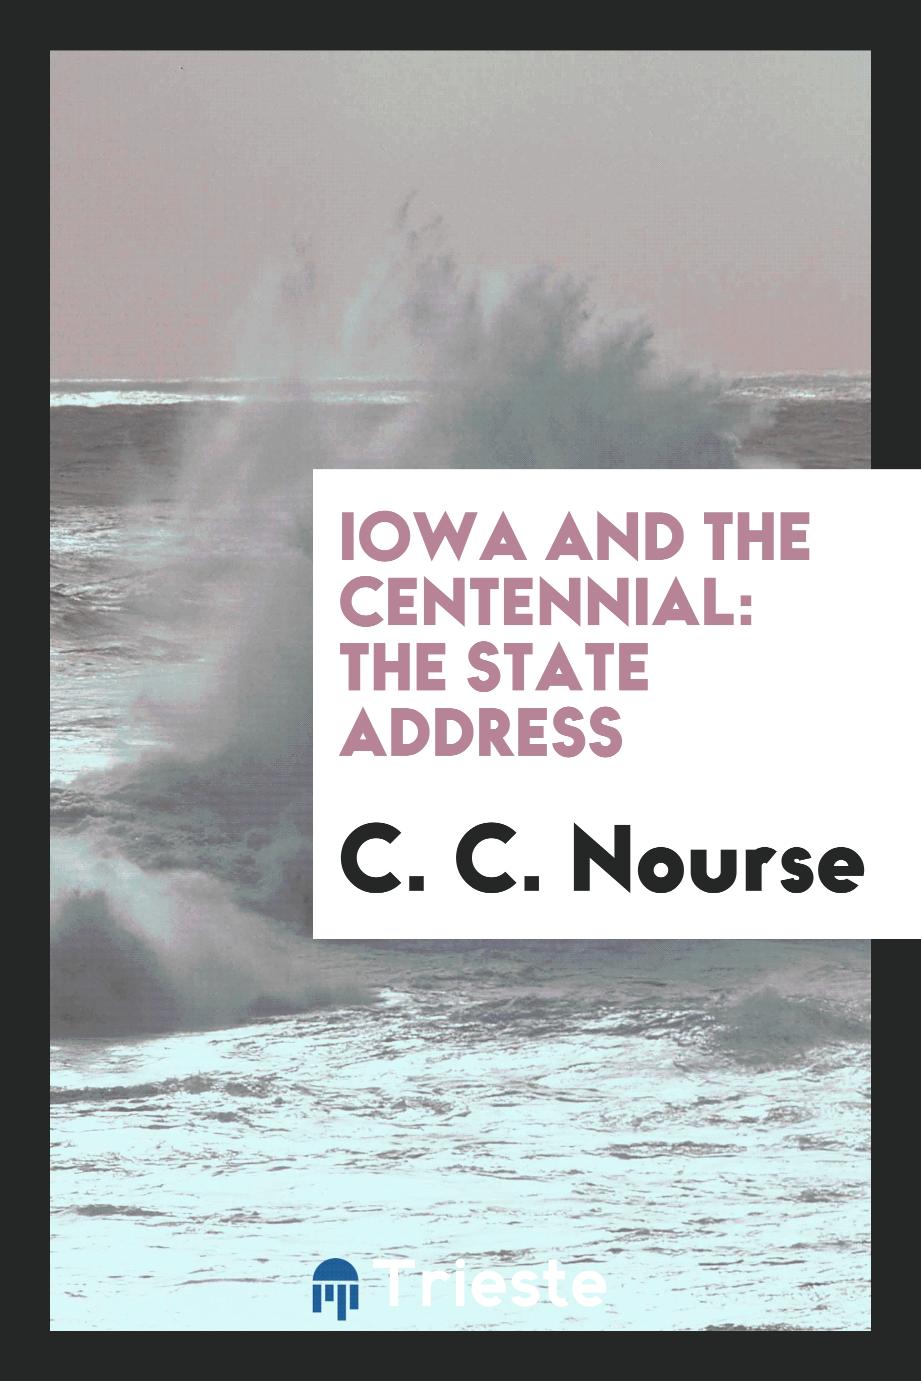 Iowa and the Centennial: The State Address